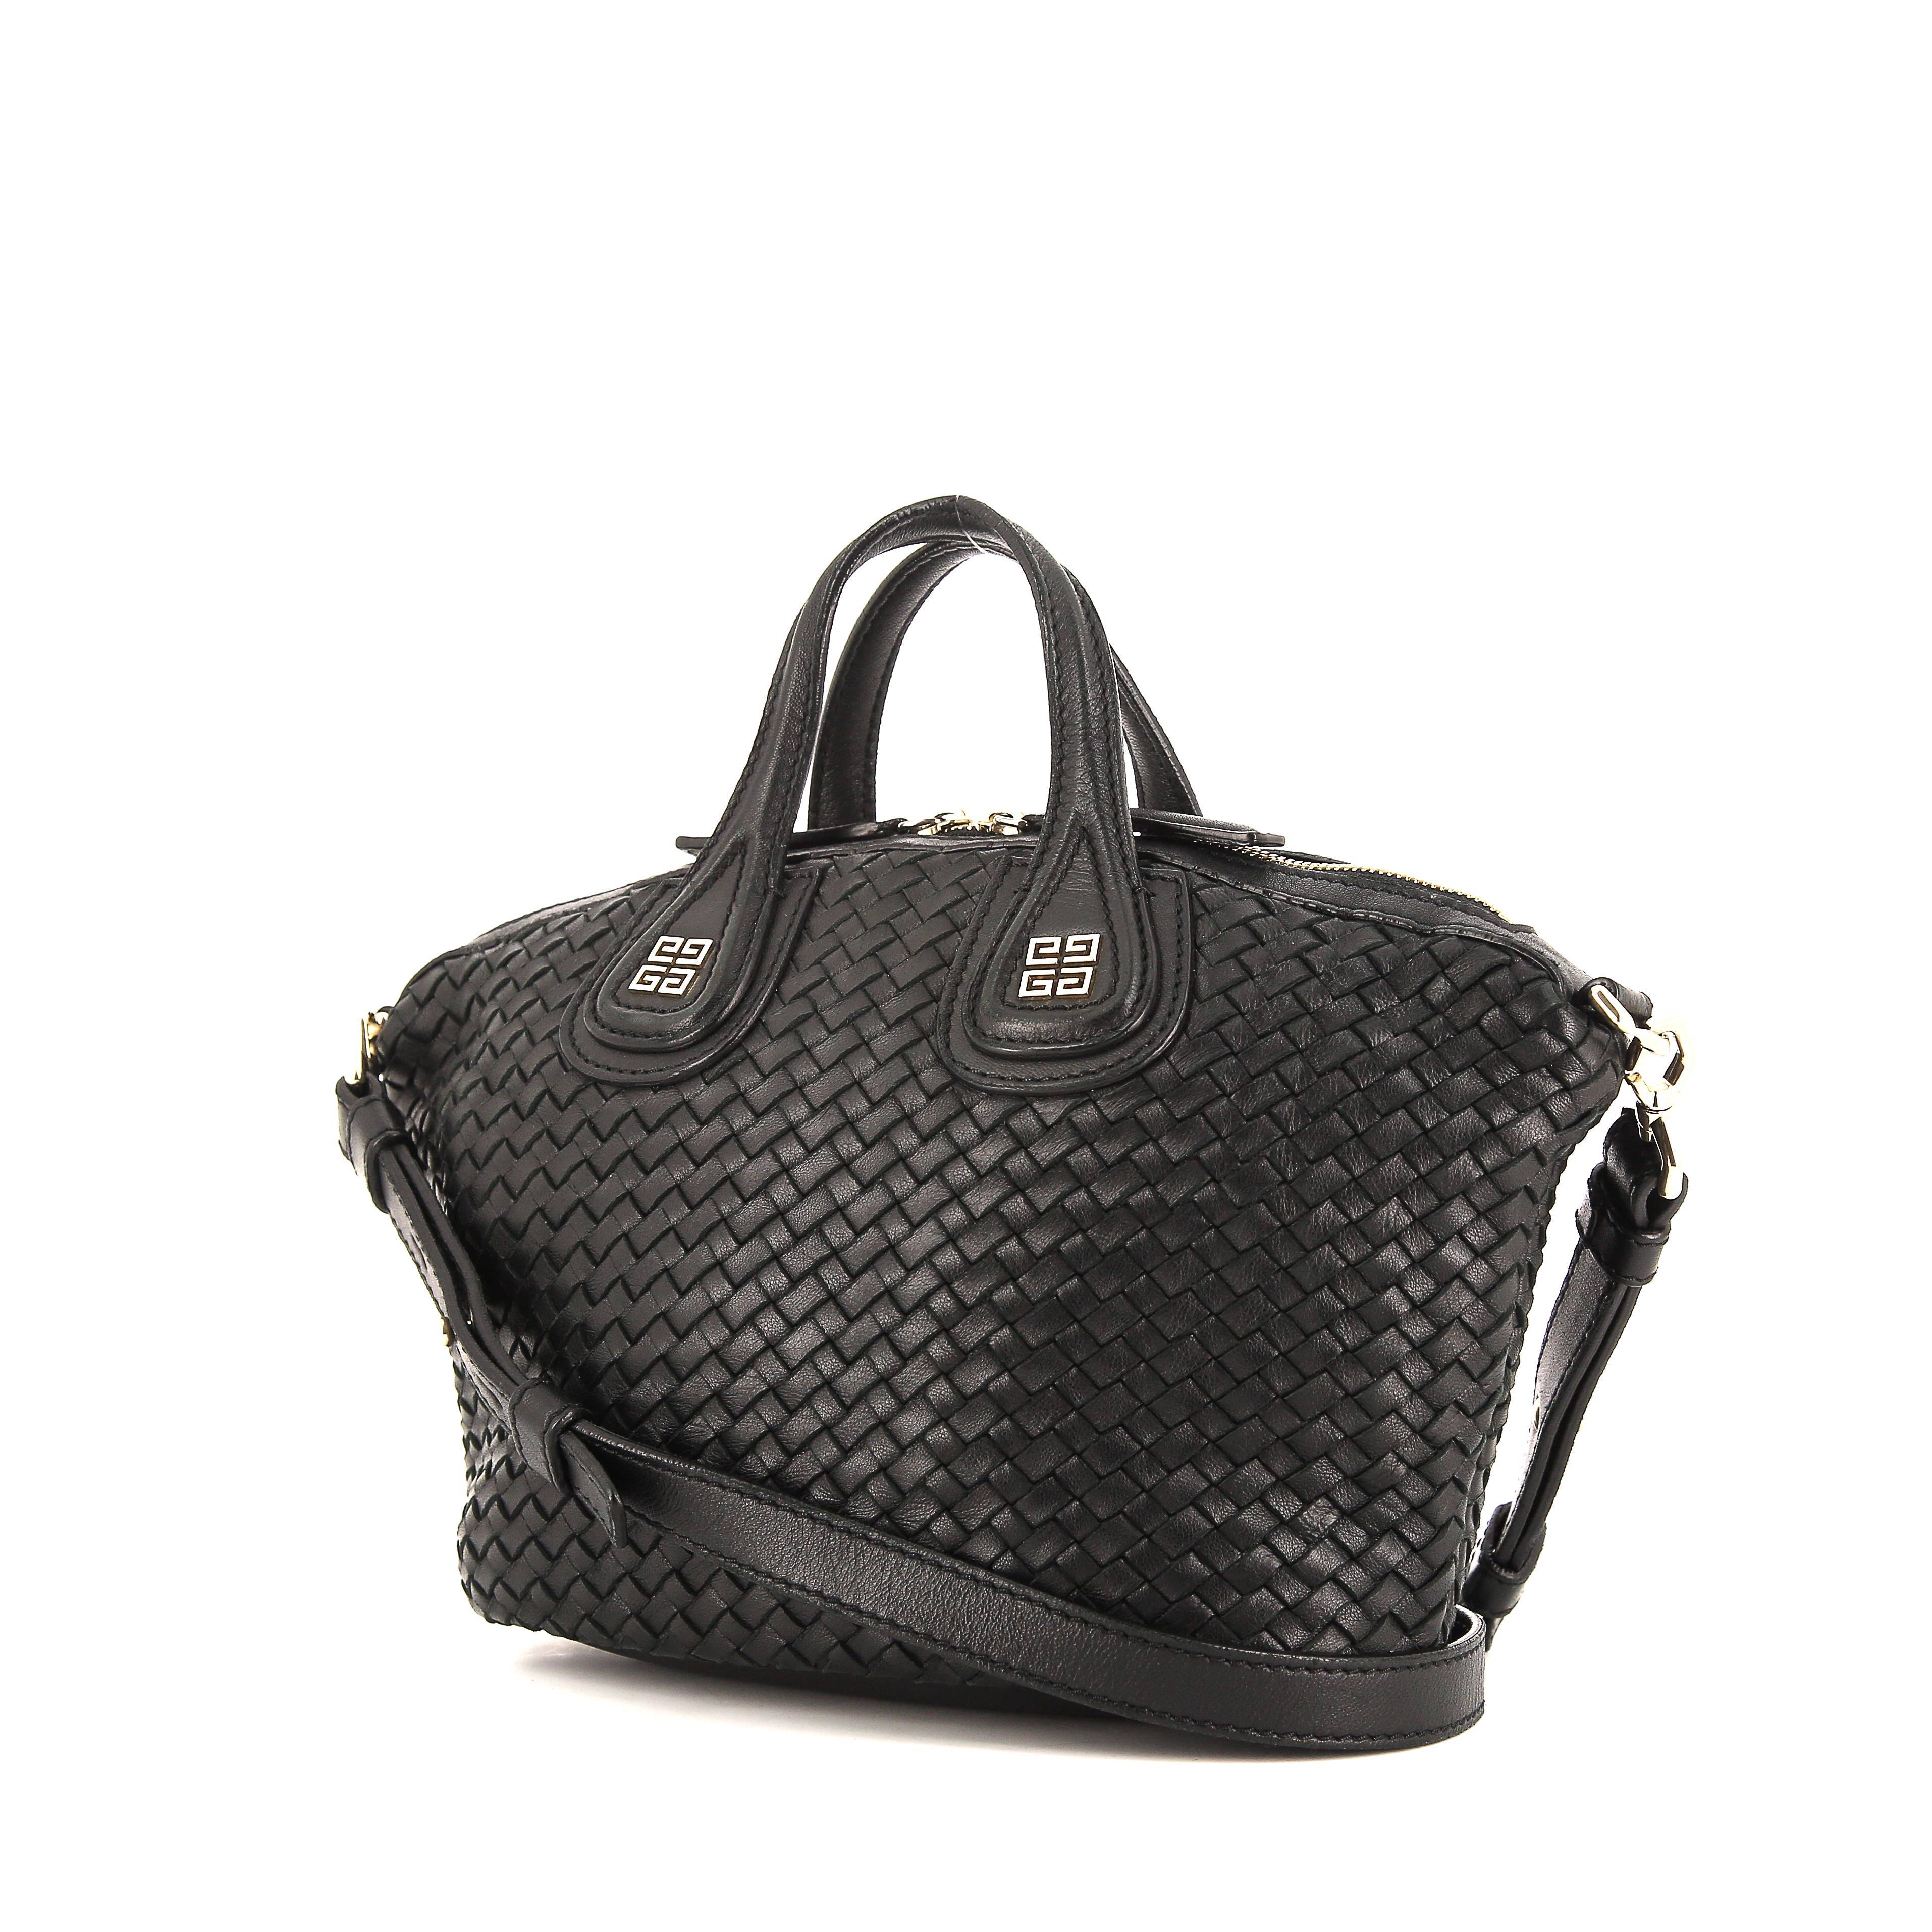 The Givenchy Classic Nightingale Bag Gets an Update for Pre-fall 2015 -  Spotted Fashion